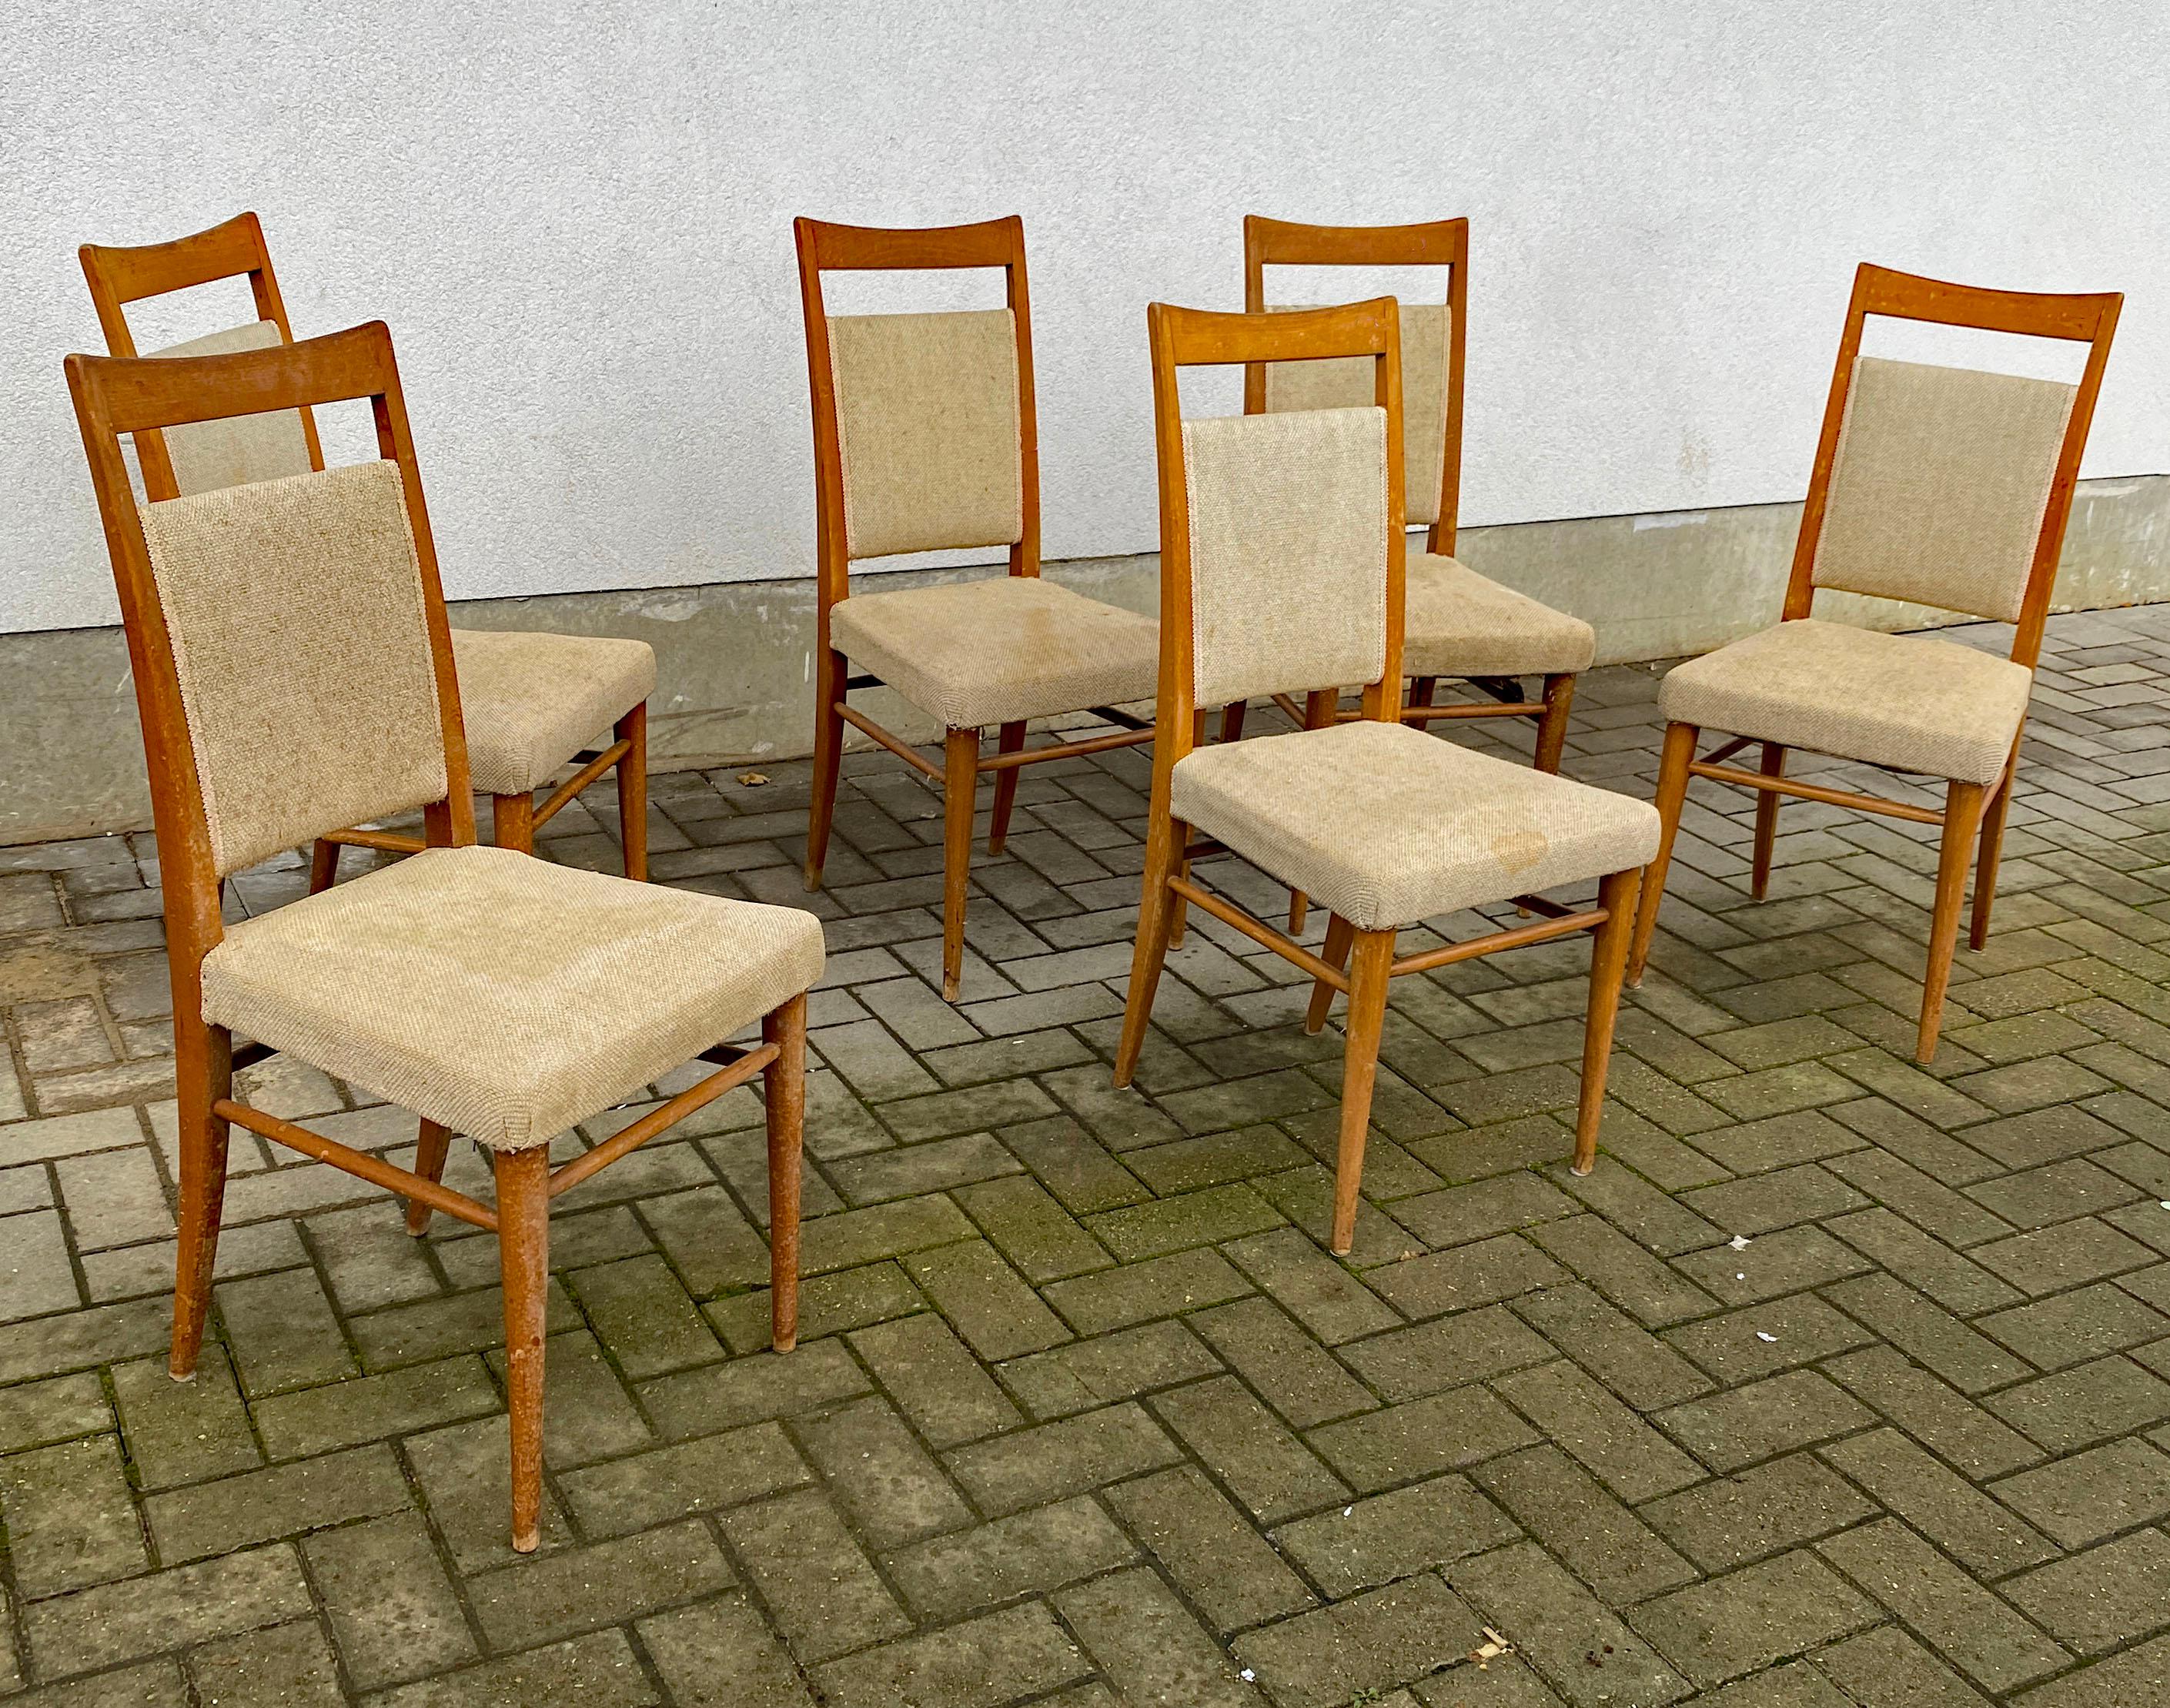 suite of 6 chairs circa 1950/1960
patina and fabric to be redone